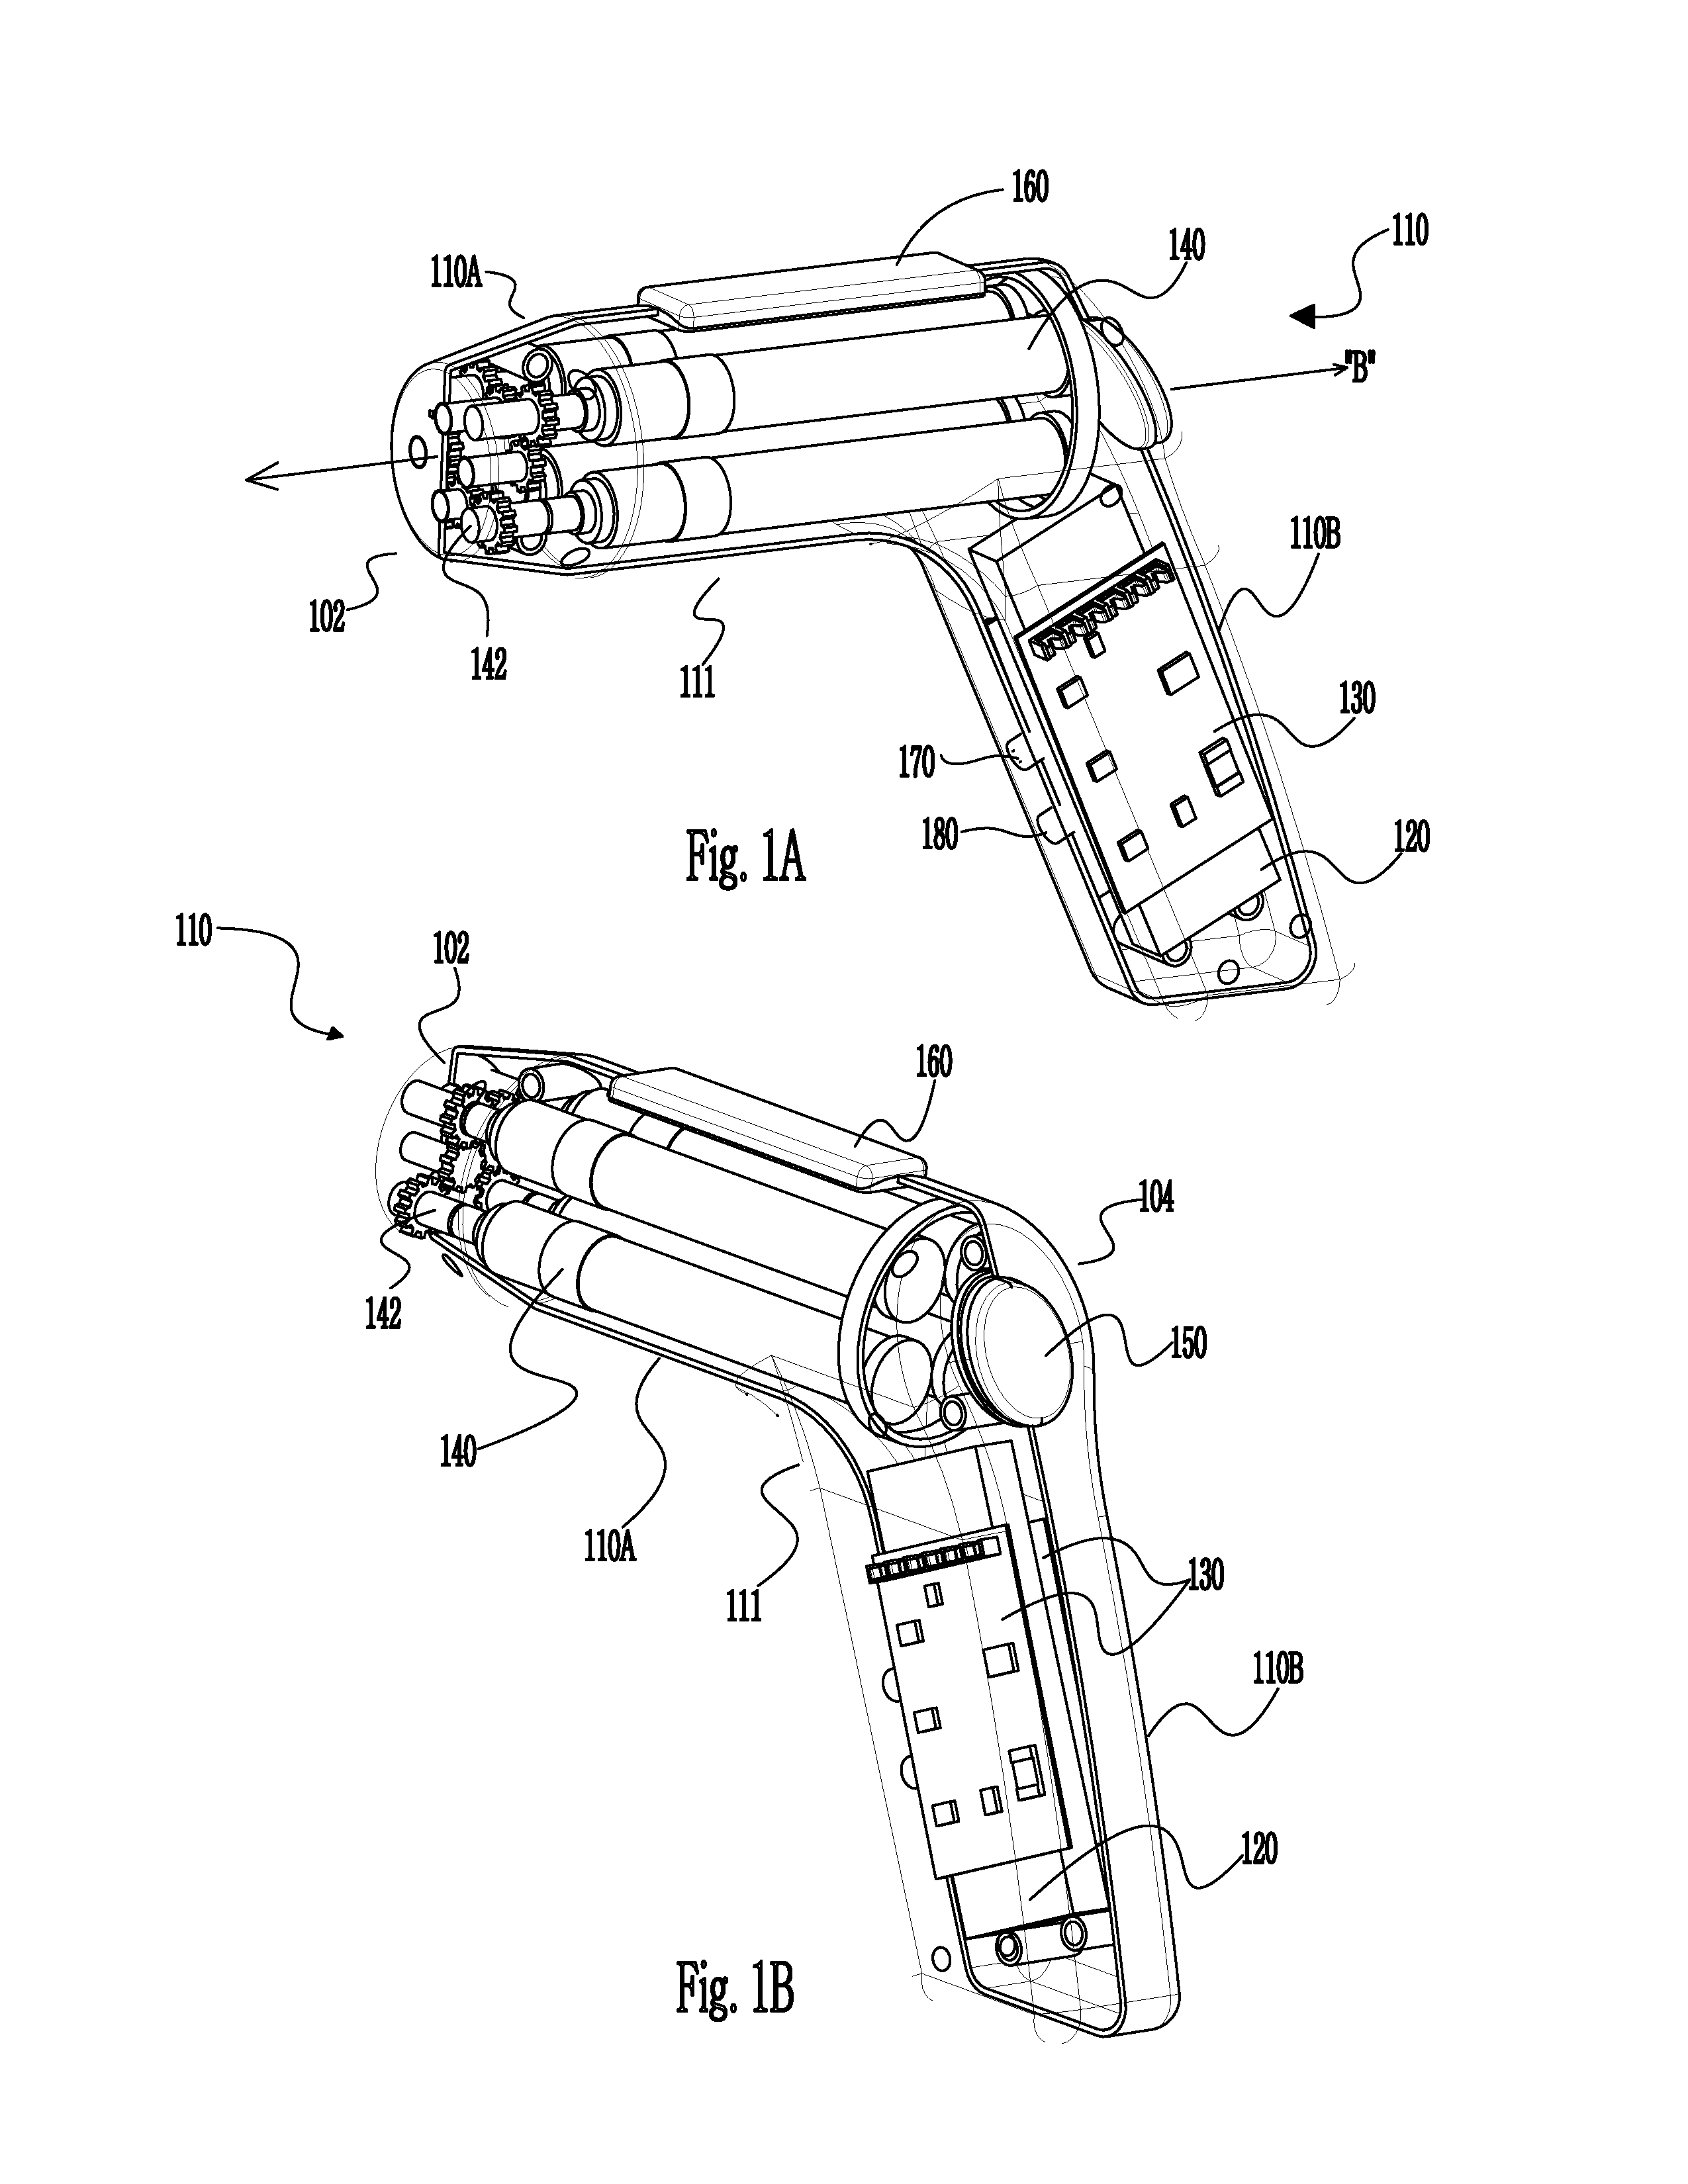 System and method for performing surgical procedures with a reusable instrument module